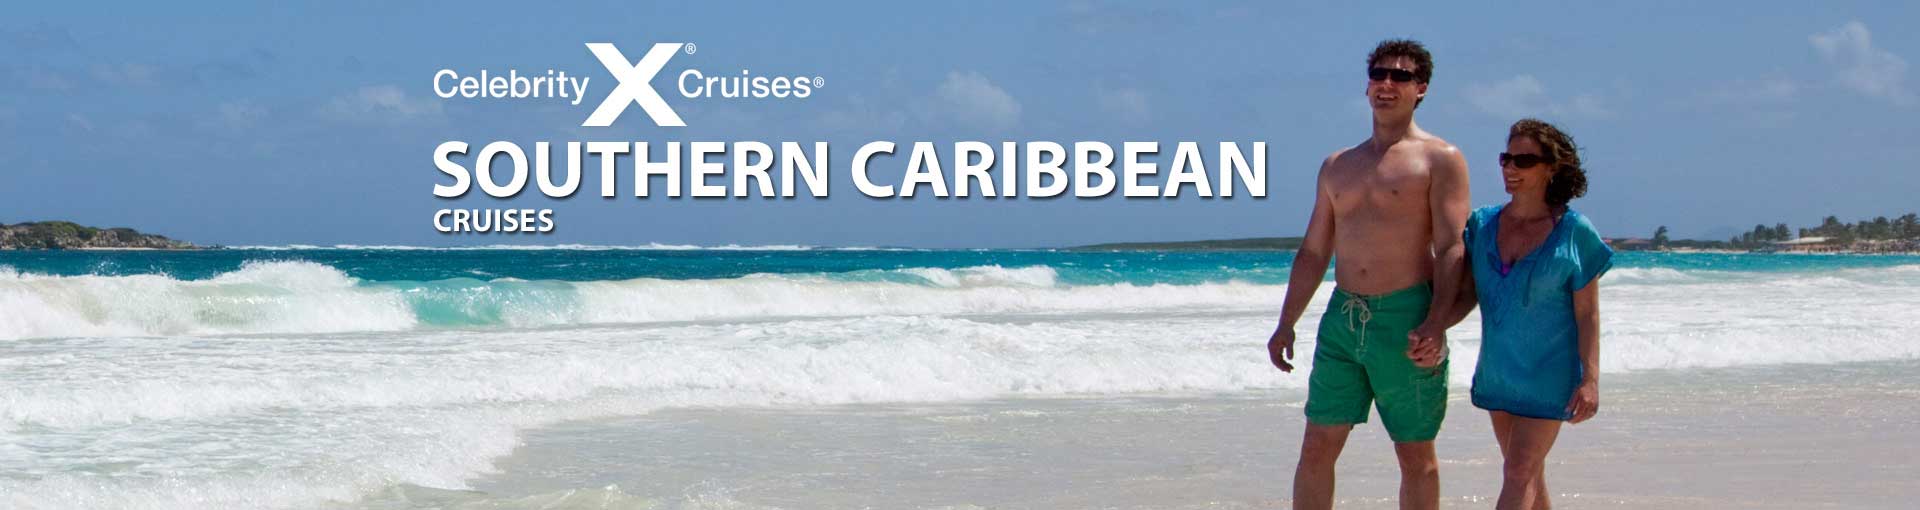 Celebrity Southern Caribbean Cruises, 2019, 2020 and 2021 Southern